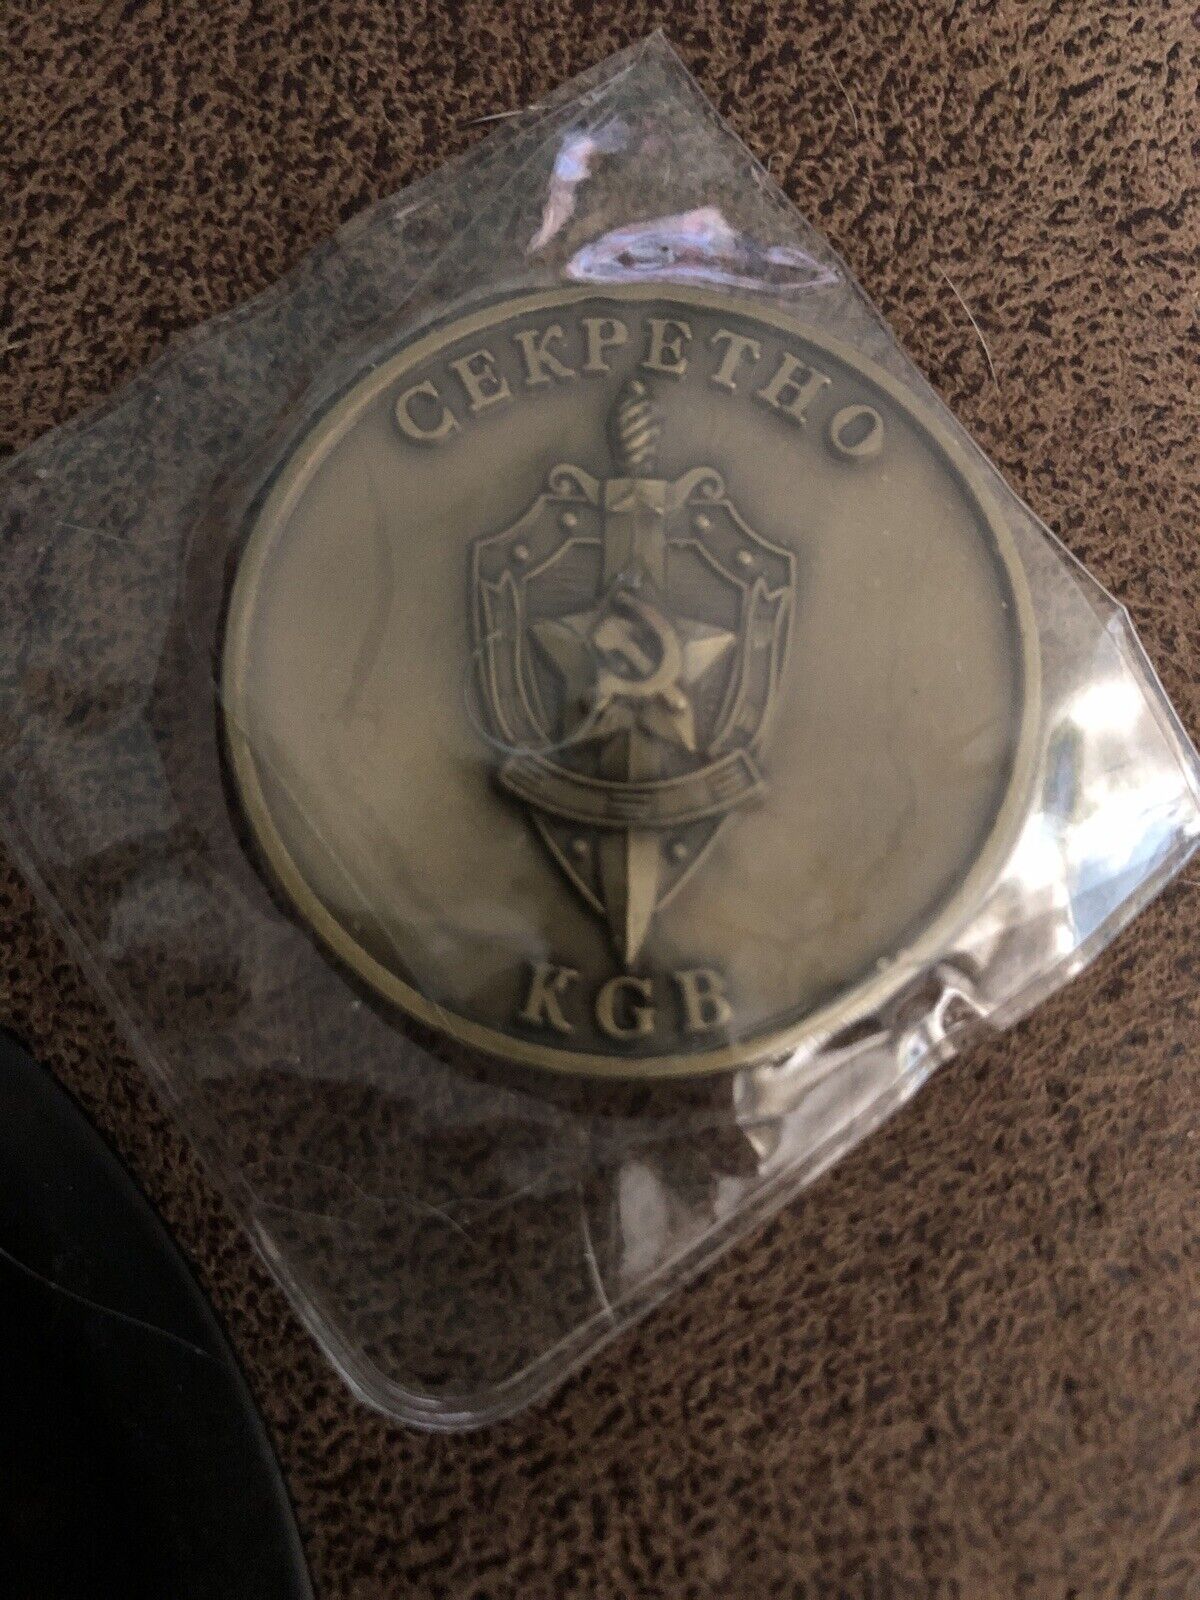 KGB SOVIET UNION USSR  RUSSIA POLICE CHALLENGE COIN 